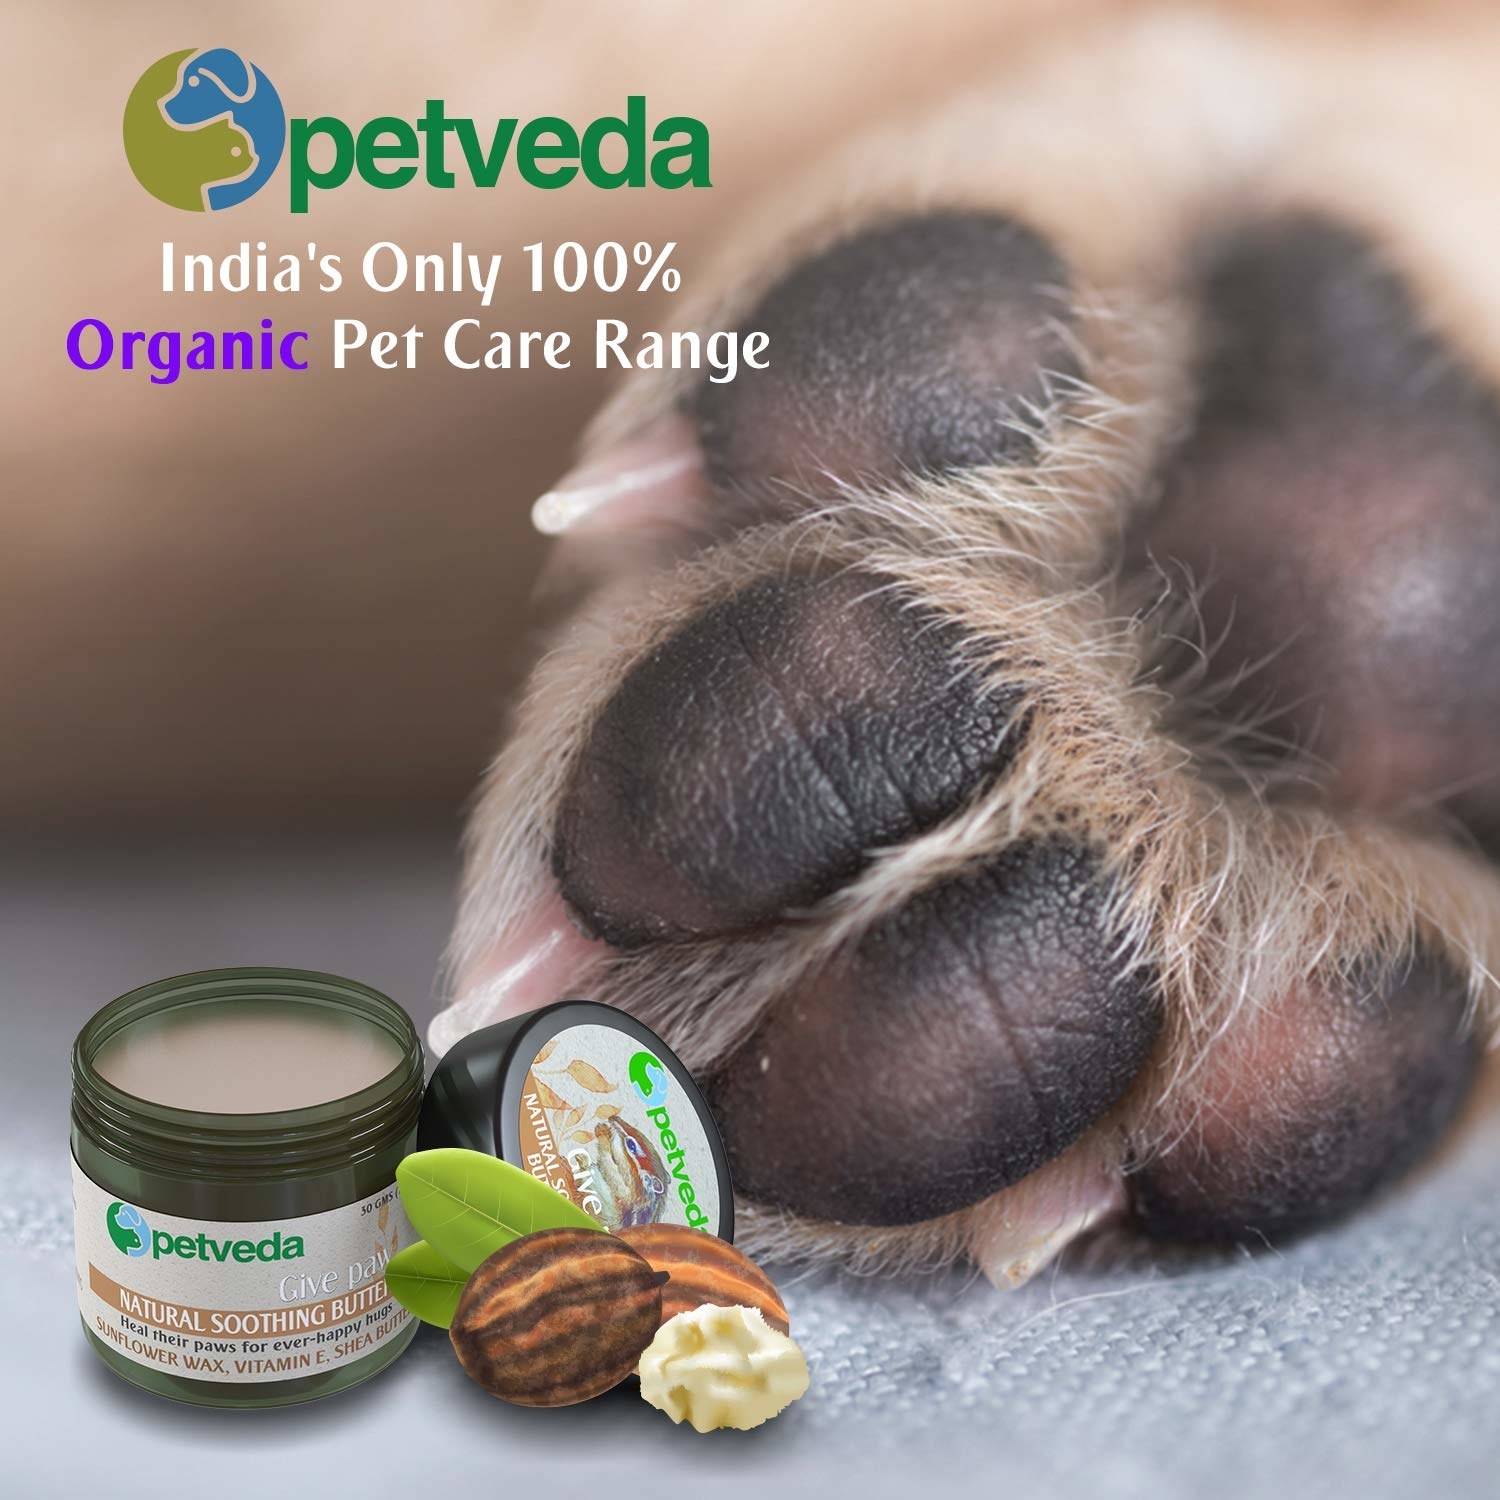 Image showing a puppy&#x27;s paw and the balm bottle.